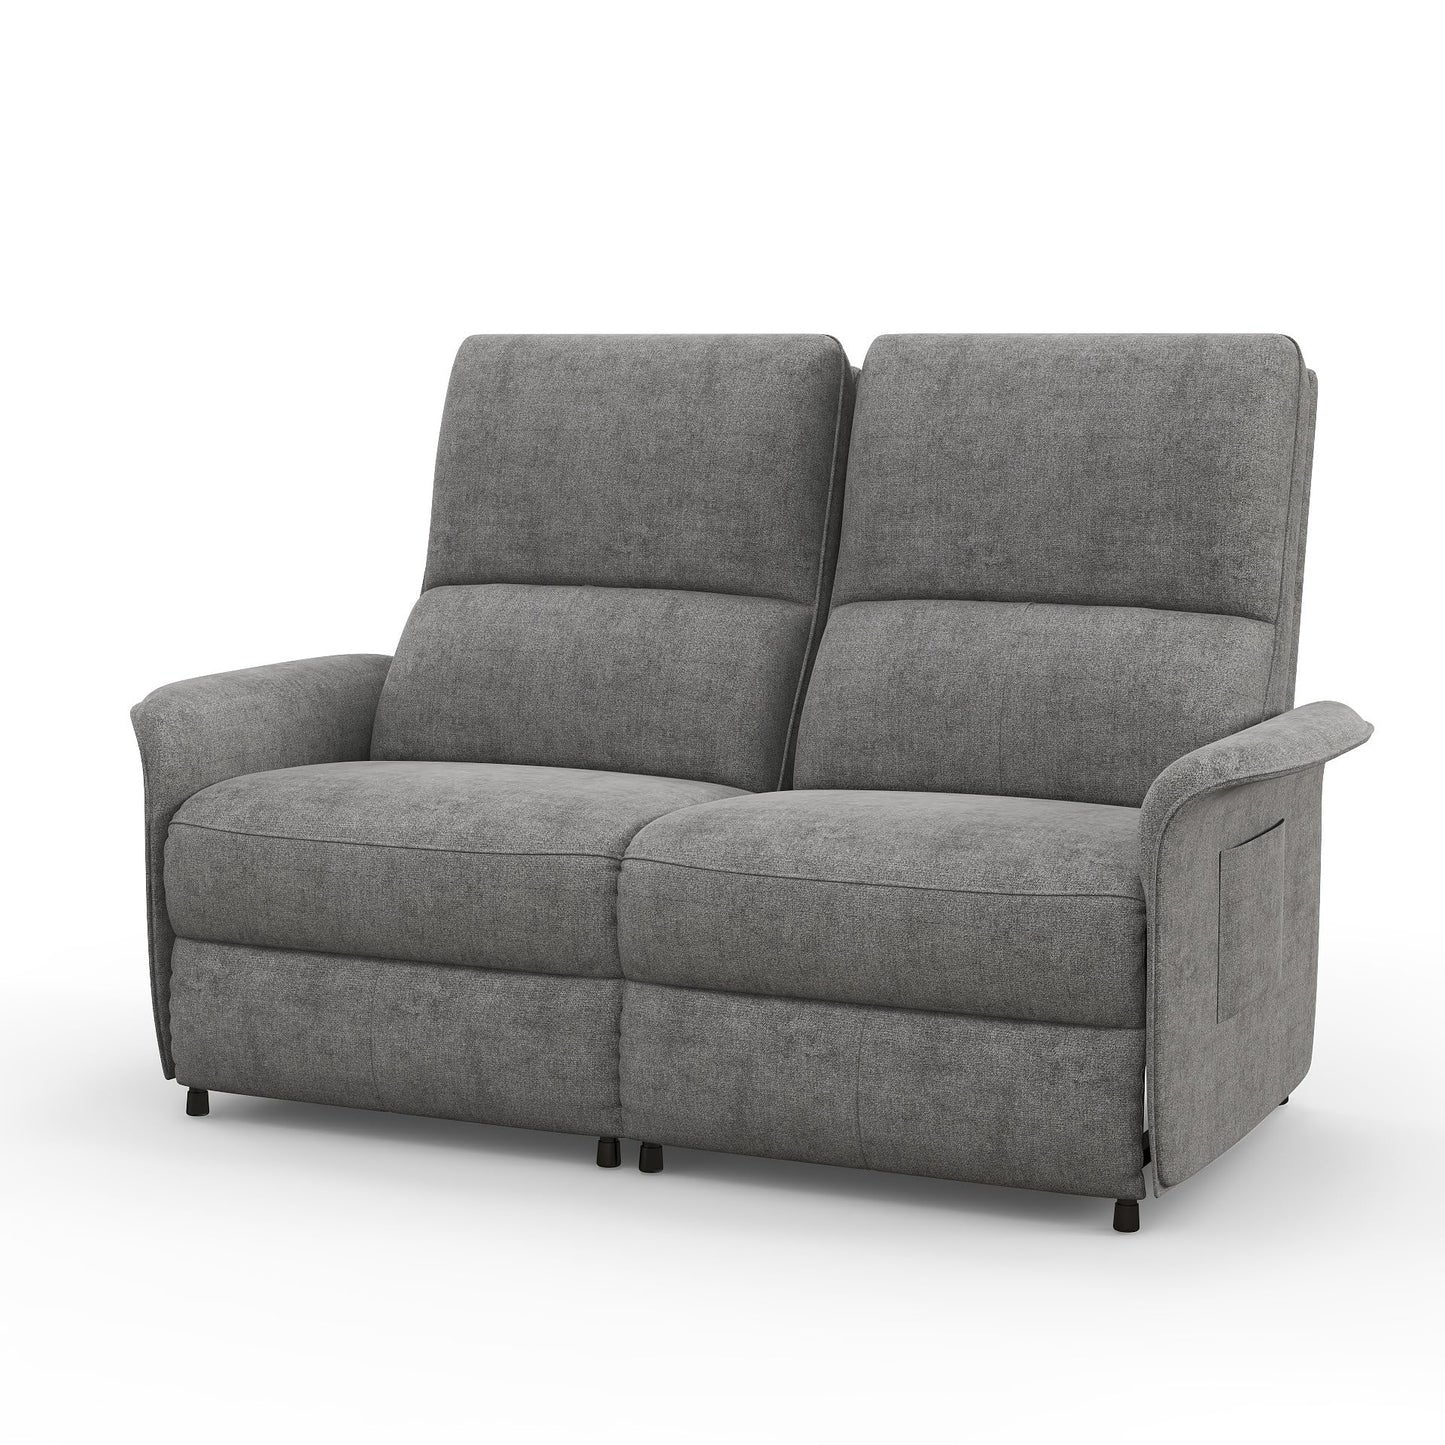 Panana Grey Fabric Electric Recliner Sofa Suites Settee Lazy Boy, 1 2 3 Seater Powered Armchair with Storage Side Pockets for Small Speace (2 + 3 Seater)